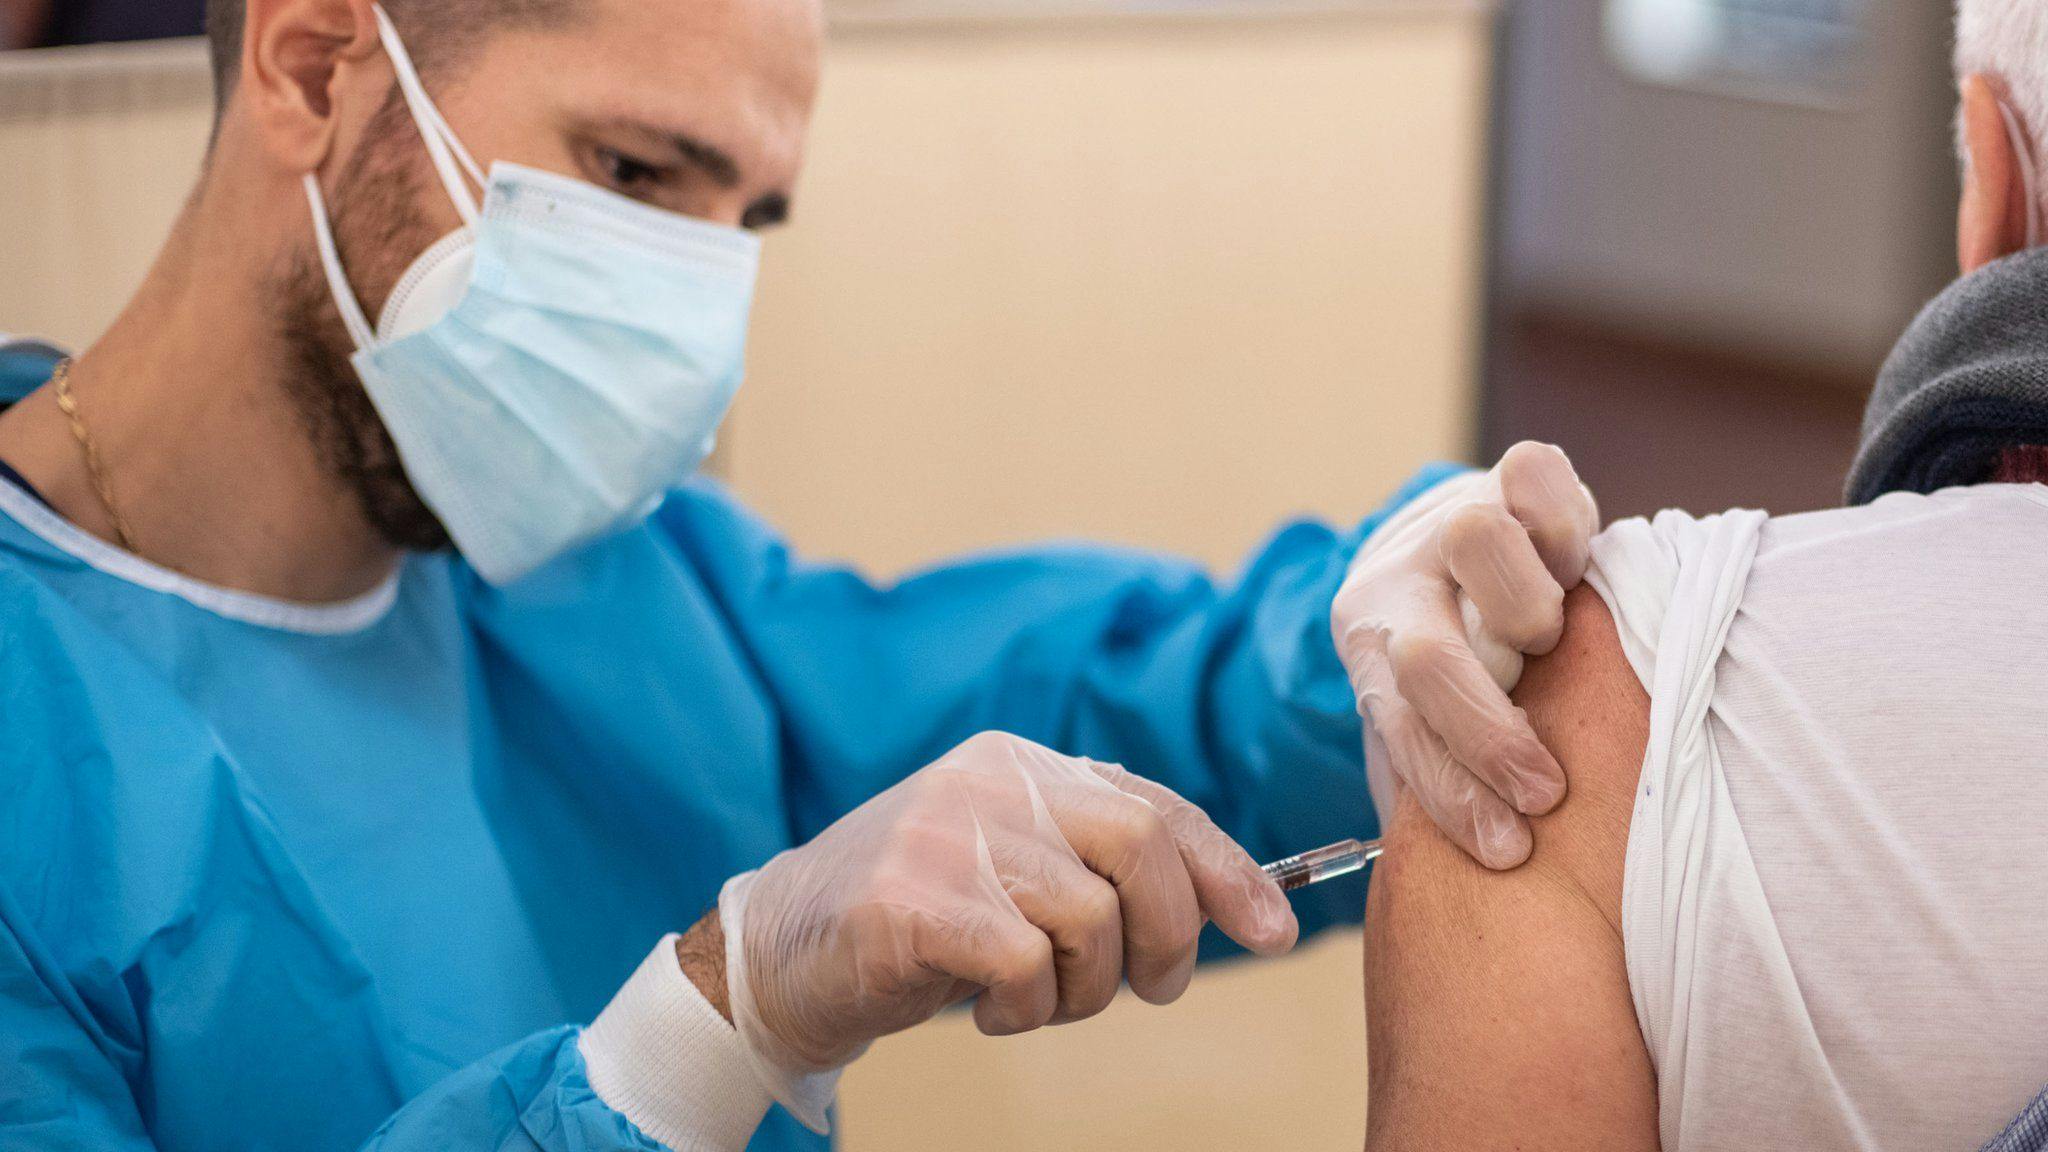 Make COVID-19 Vaccinations Mandatory for Health Workers, Groups Say